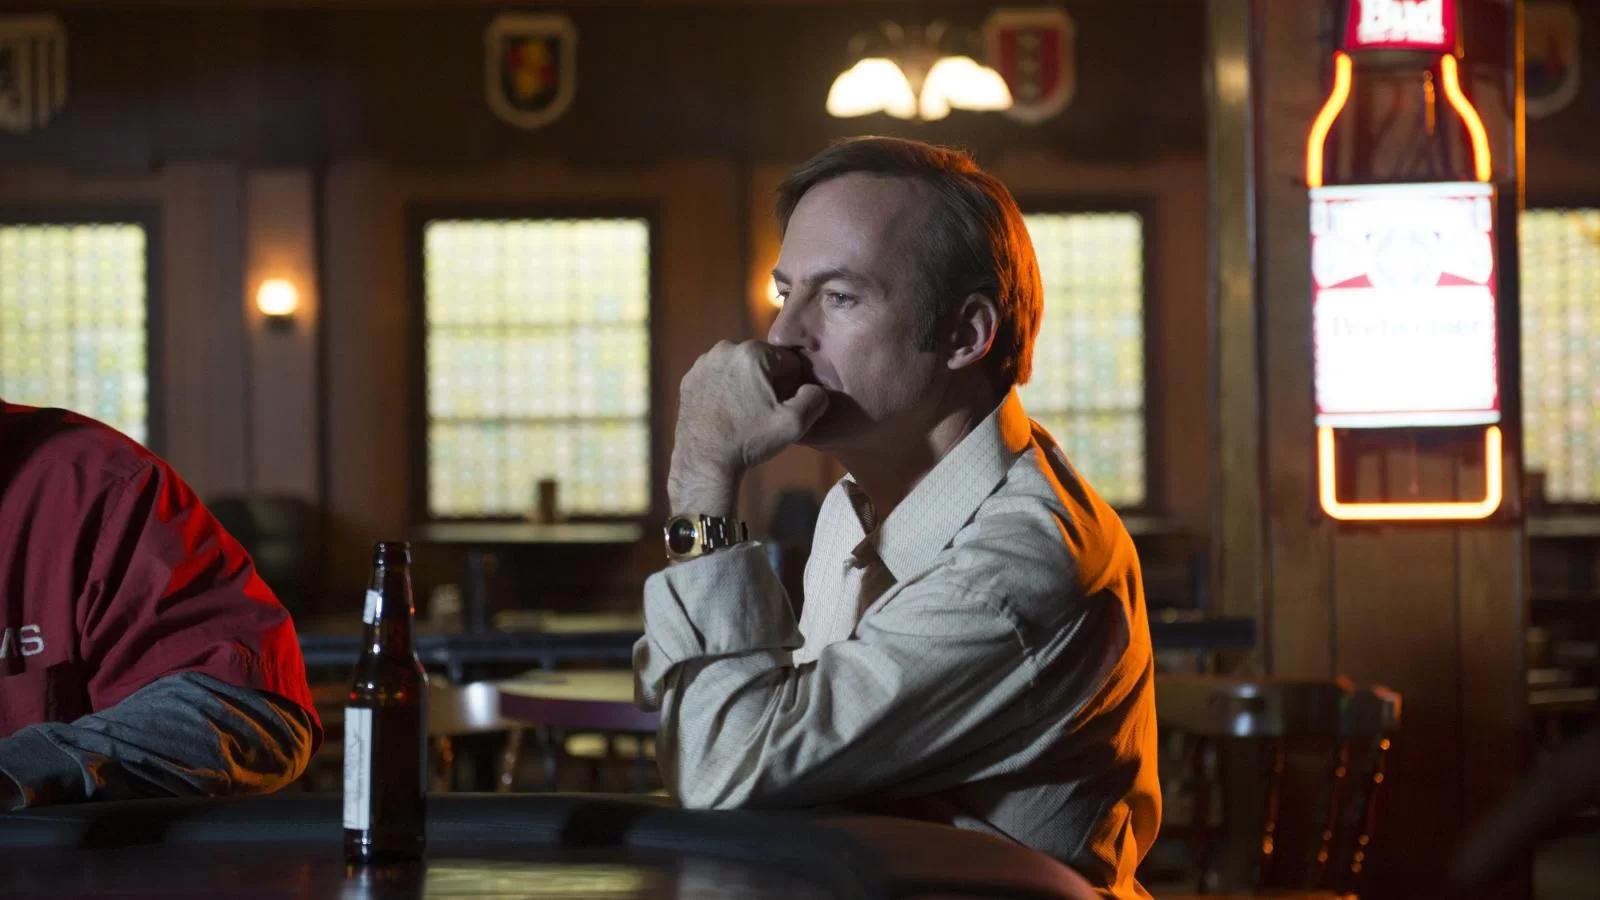 From Jimmy to Saul: The Unexpected Slow Burn of Better Call Saul's Transformation